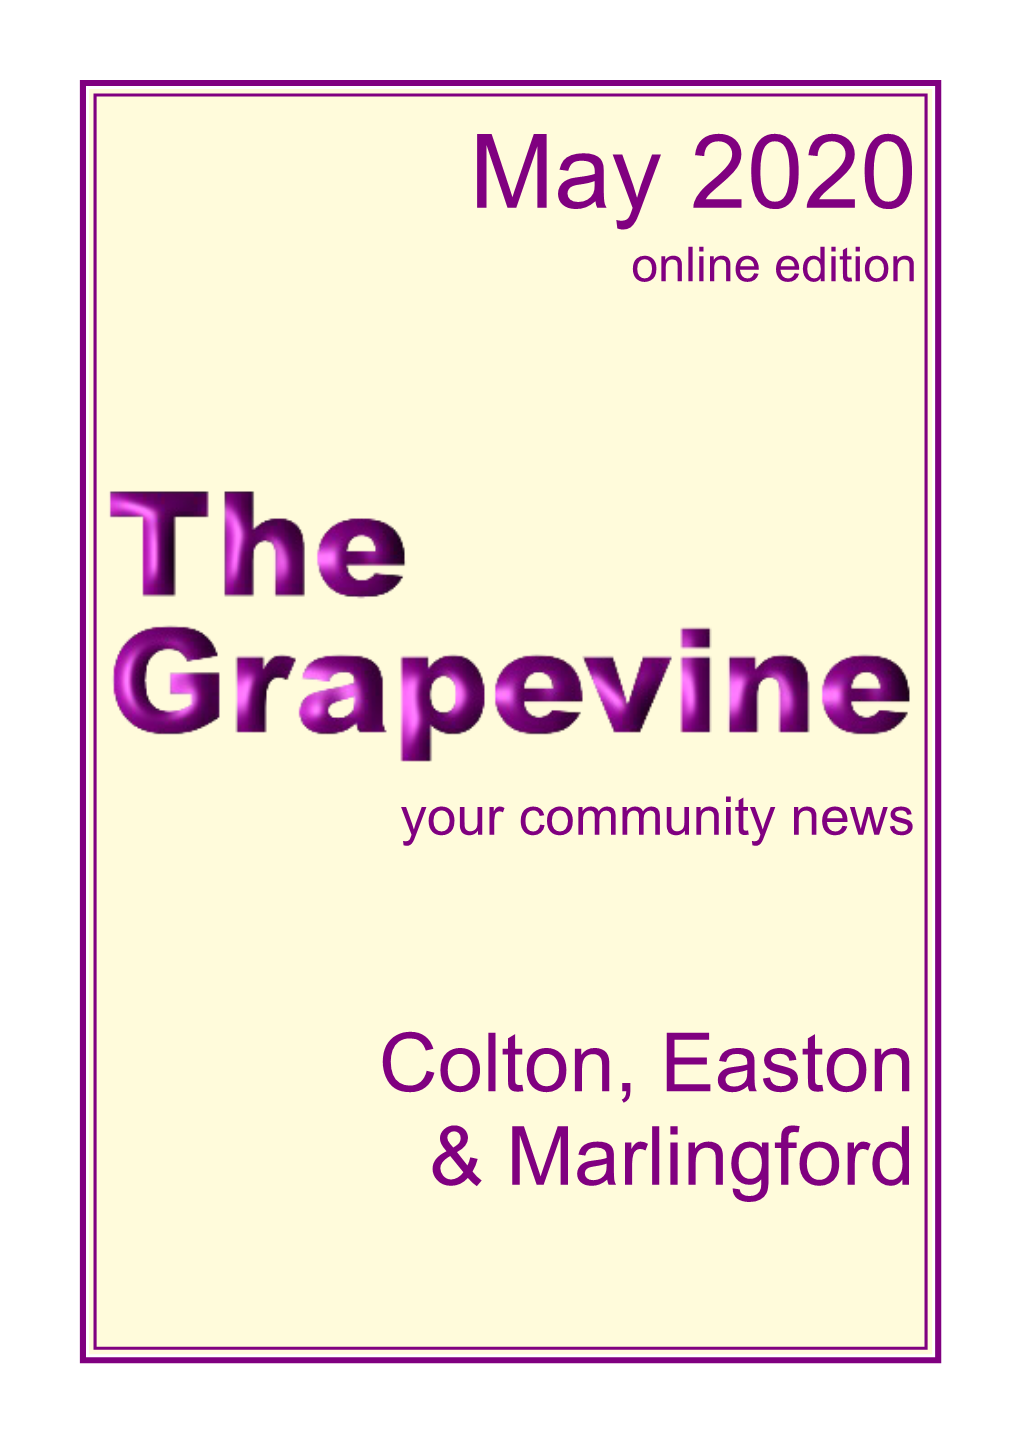 Grapevine May 2020 Template A9